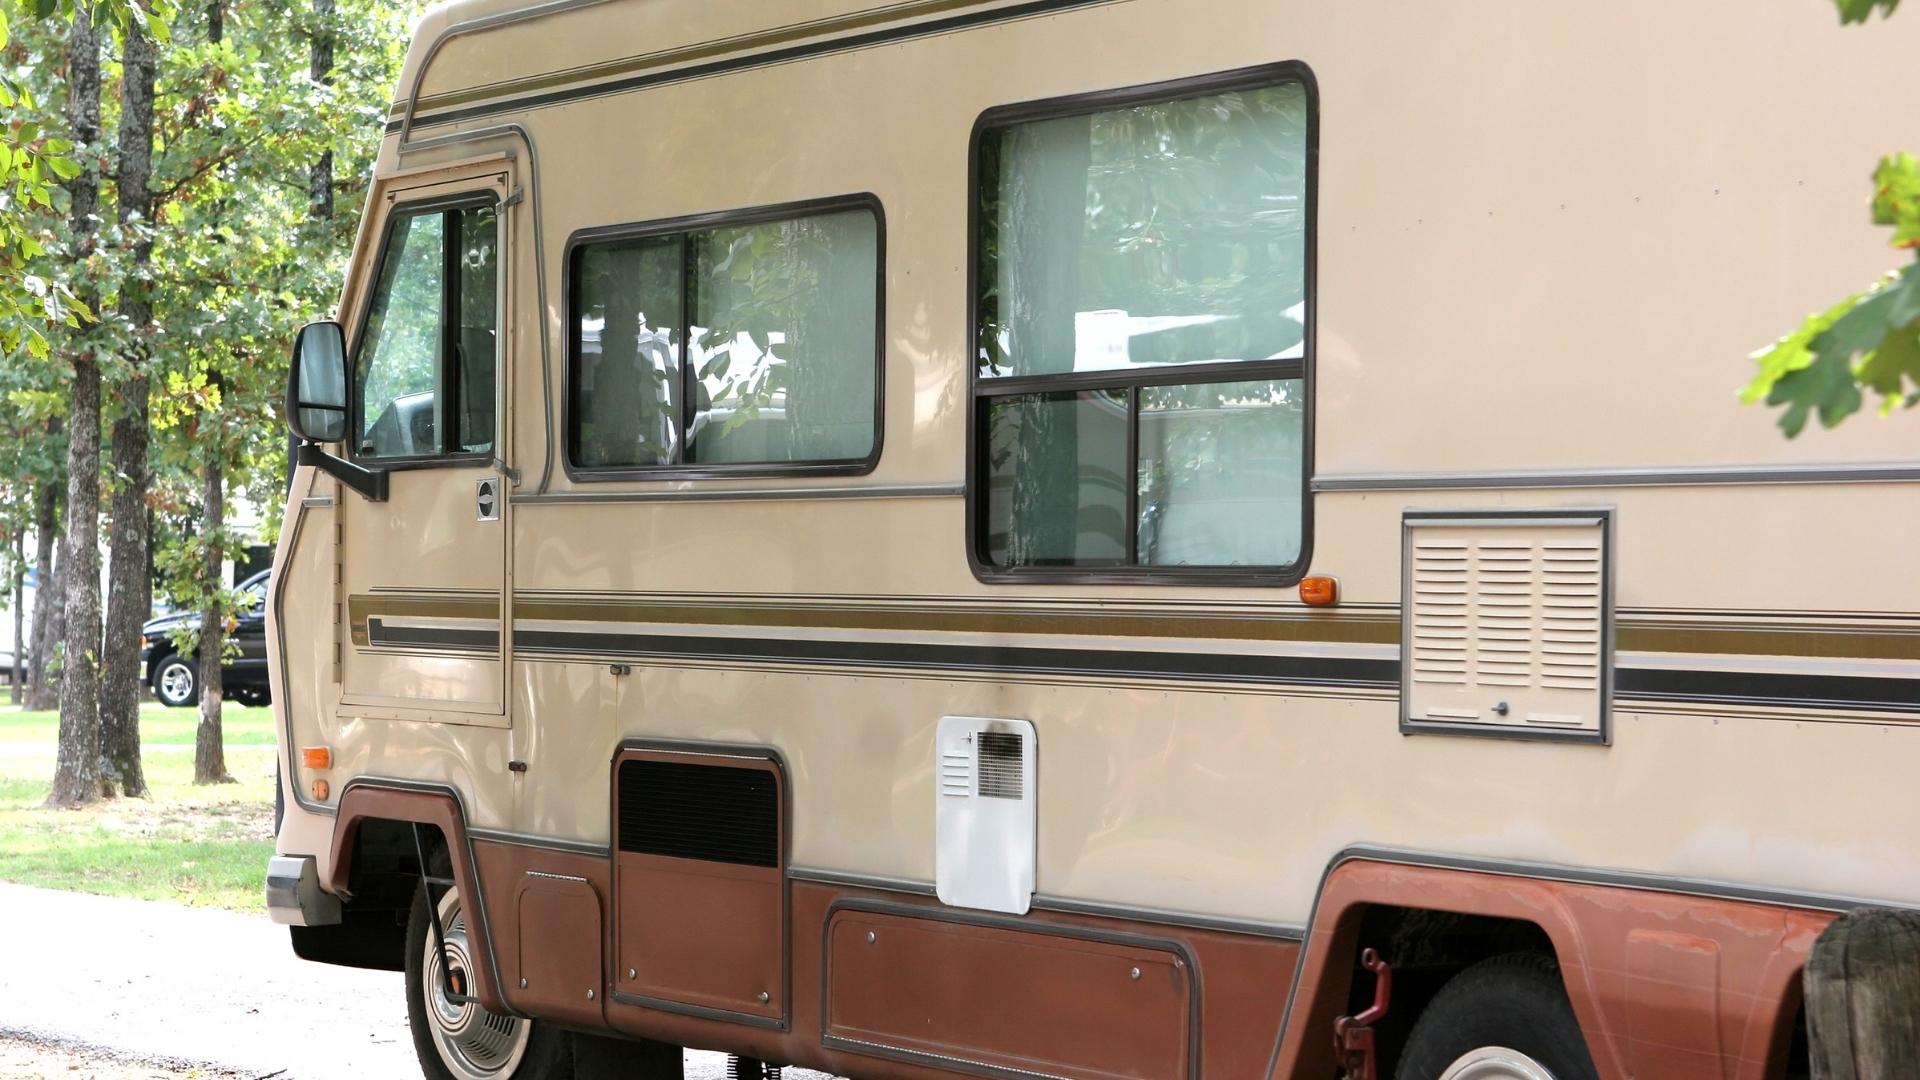 Photo of a used RV